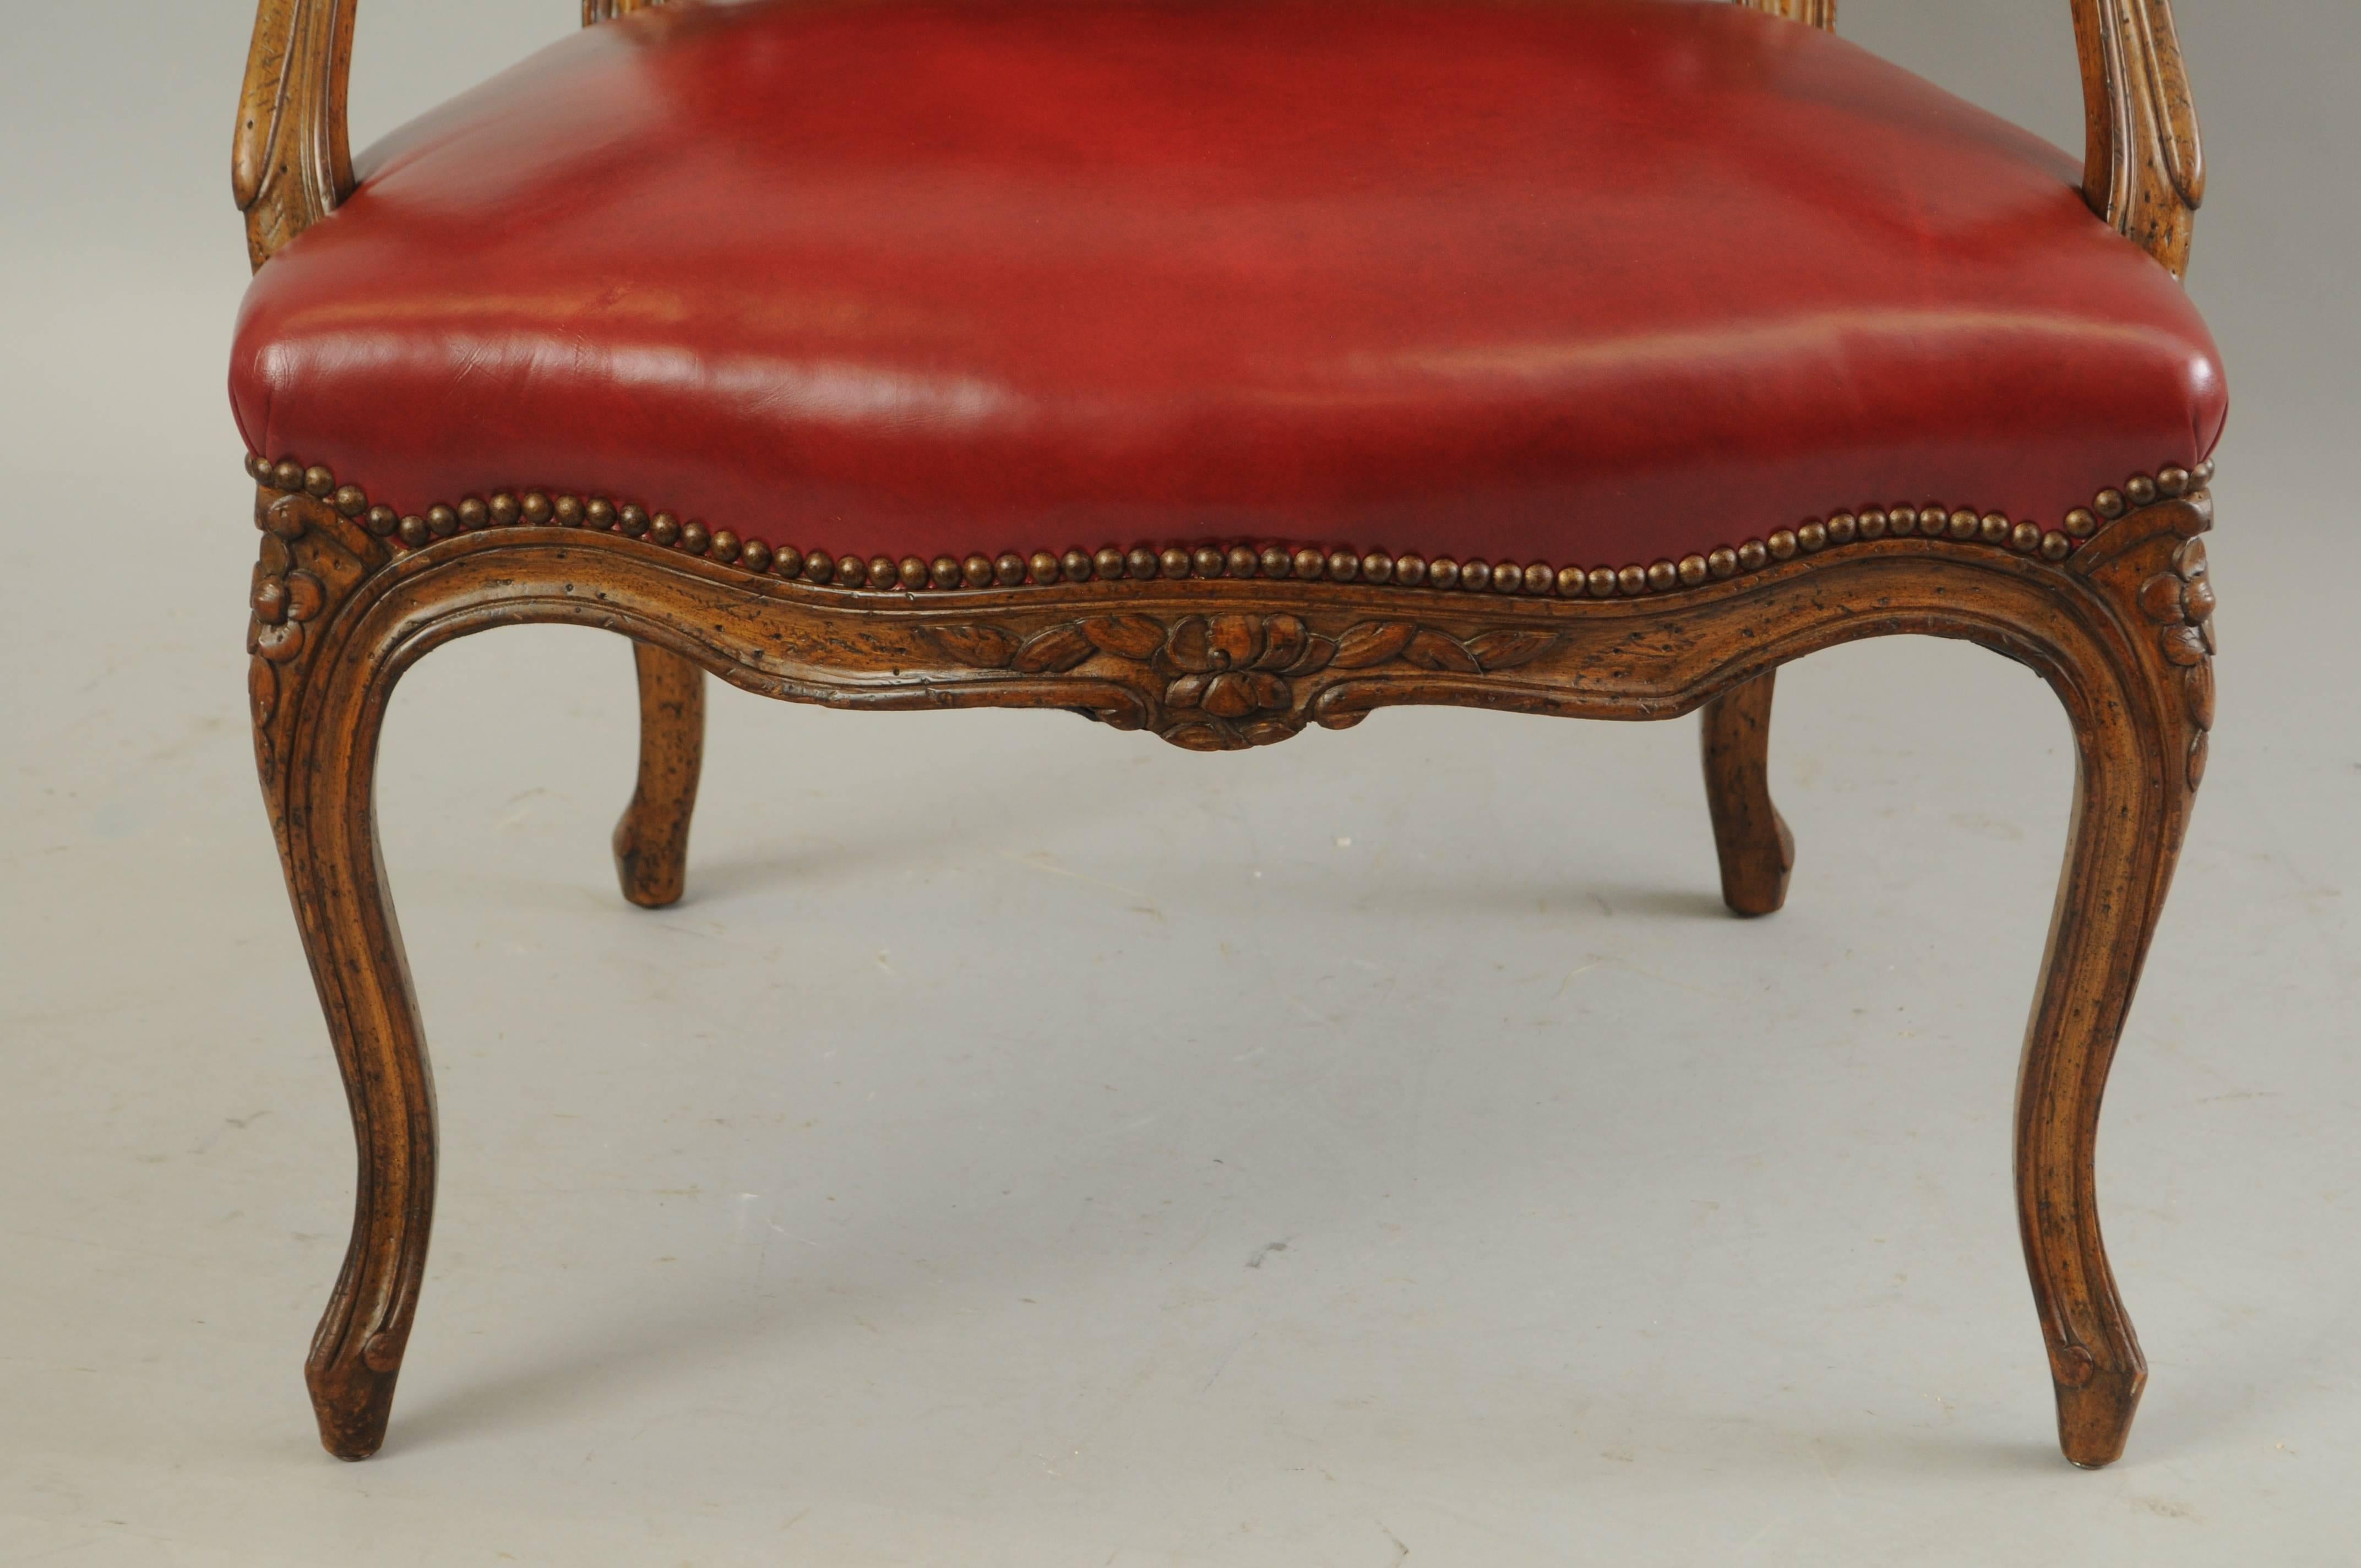 20th Century Vintage Auffray & Co French Country Louis XV Style Armchair Walnut & Red Leather